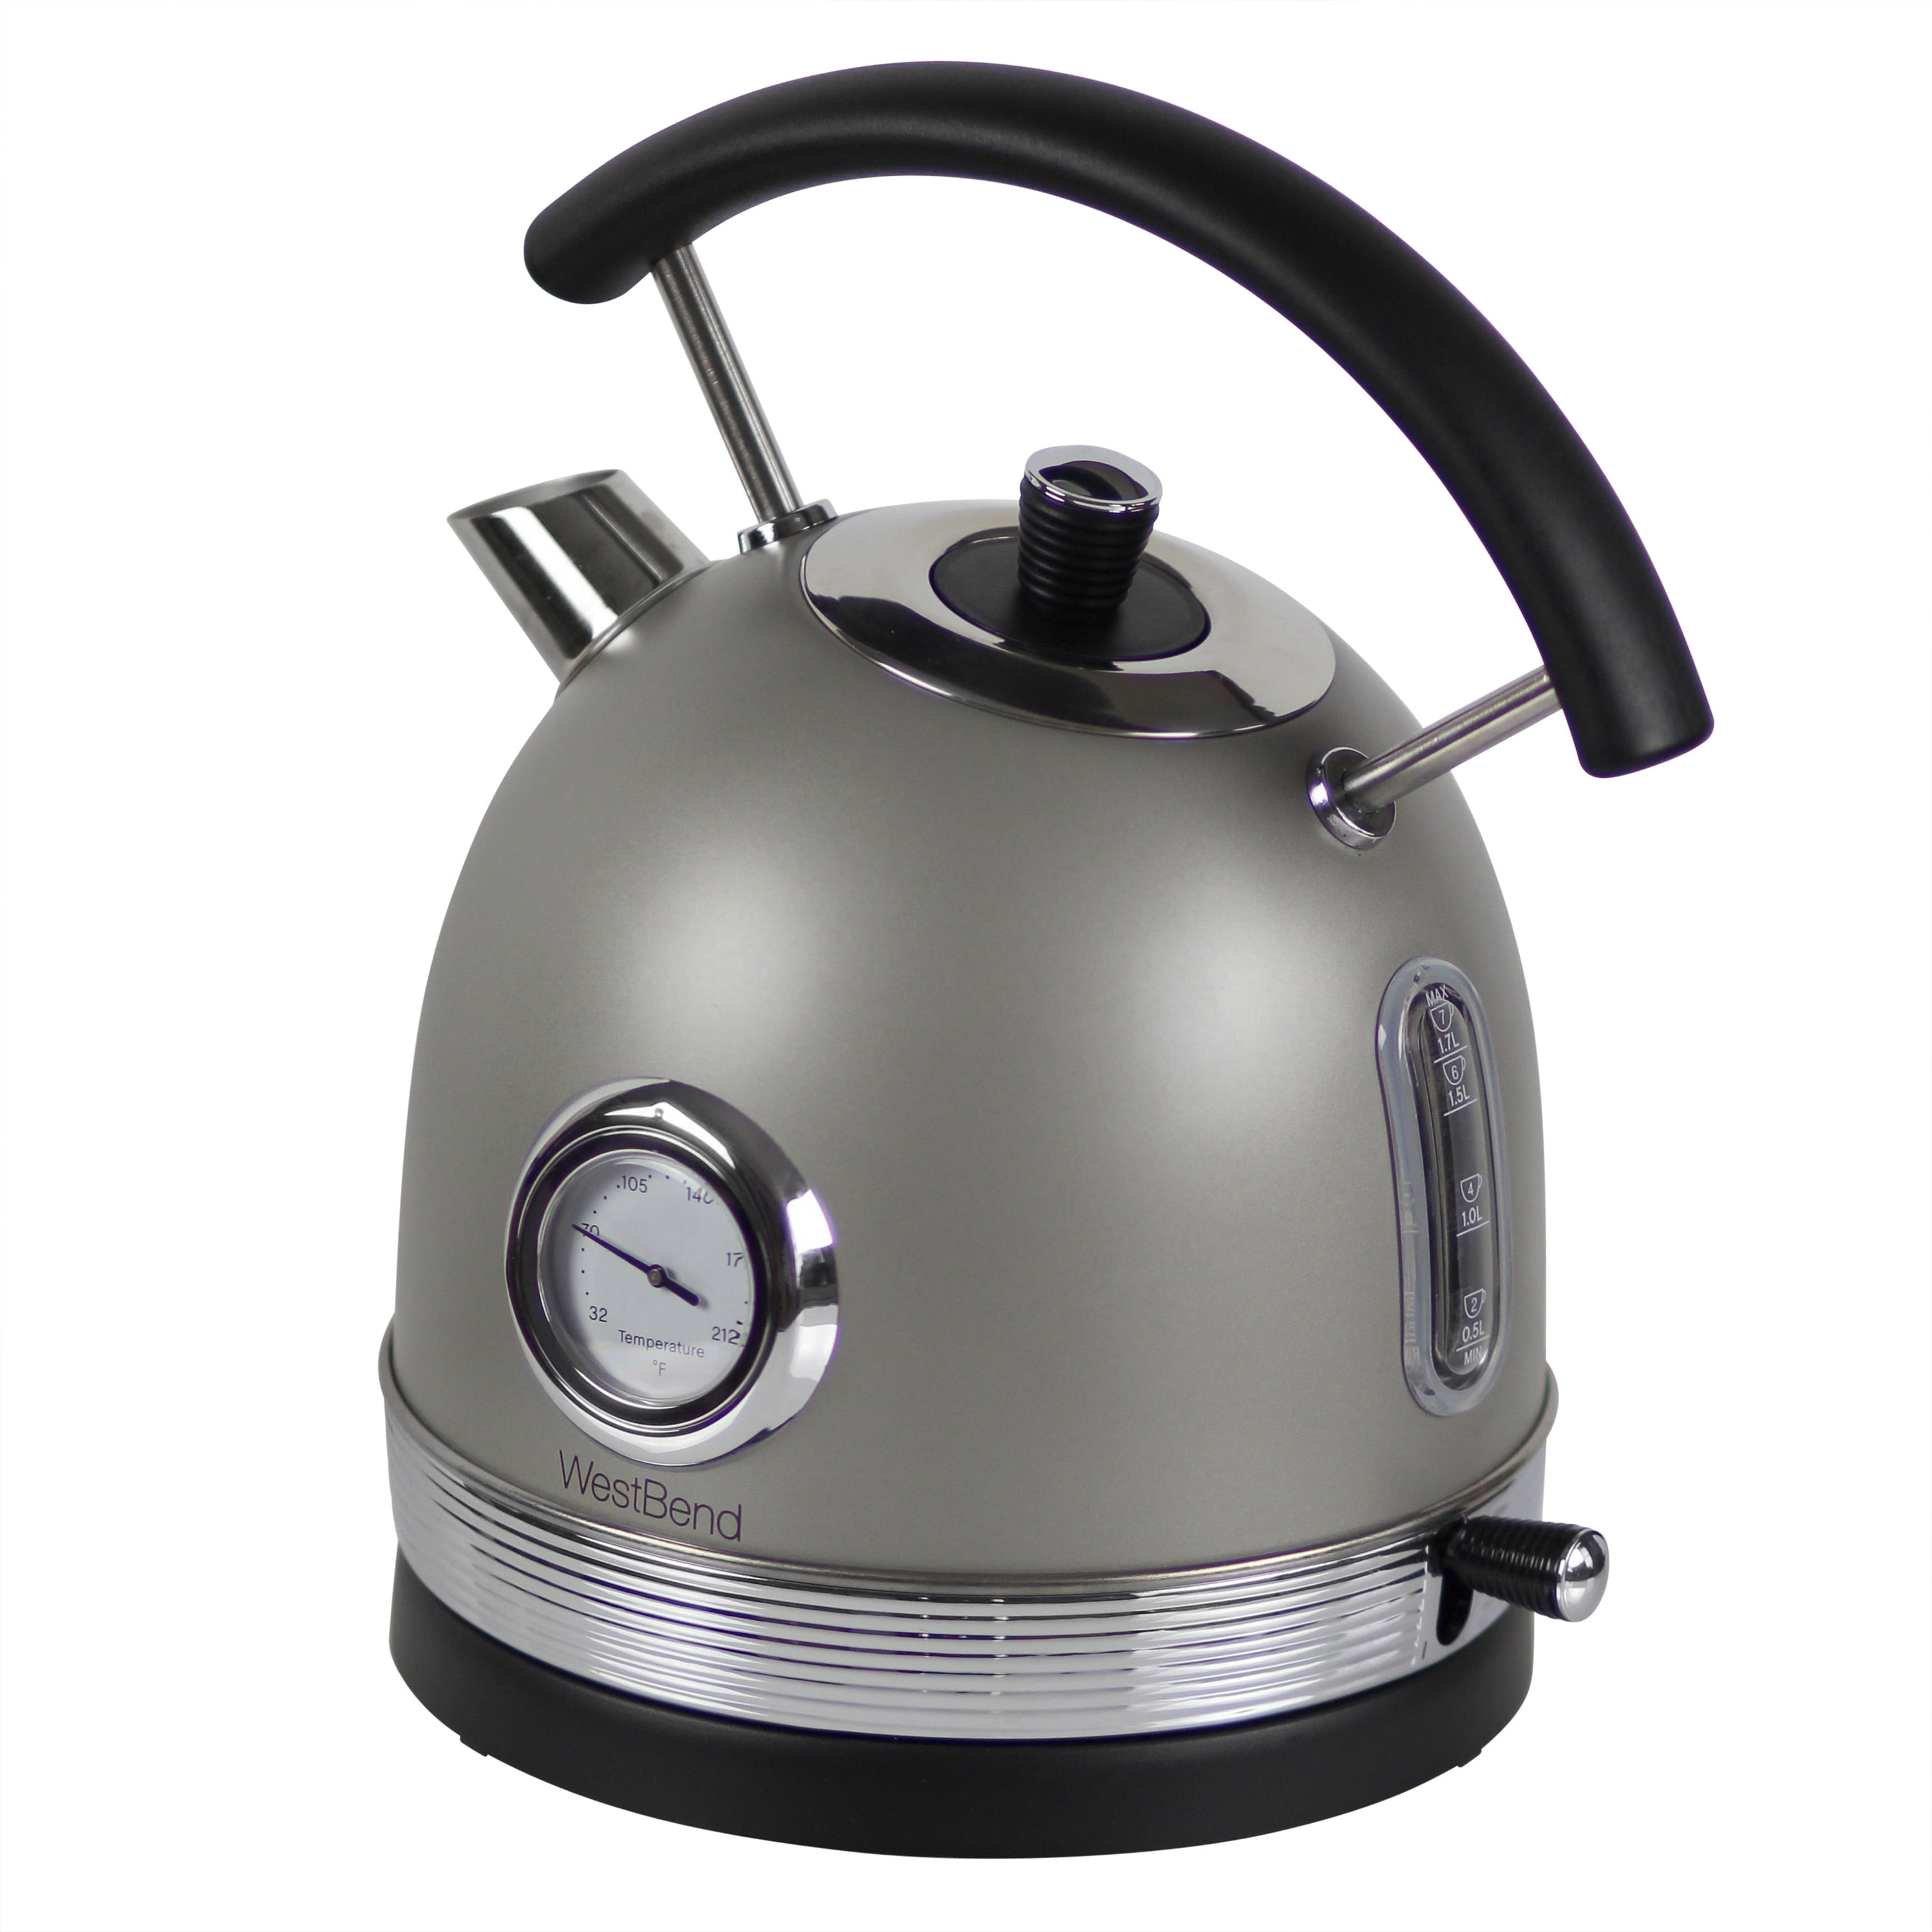 Krups 1.5L Cool Touch Stainless Steel Electric Kettle - Black